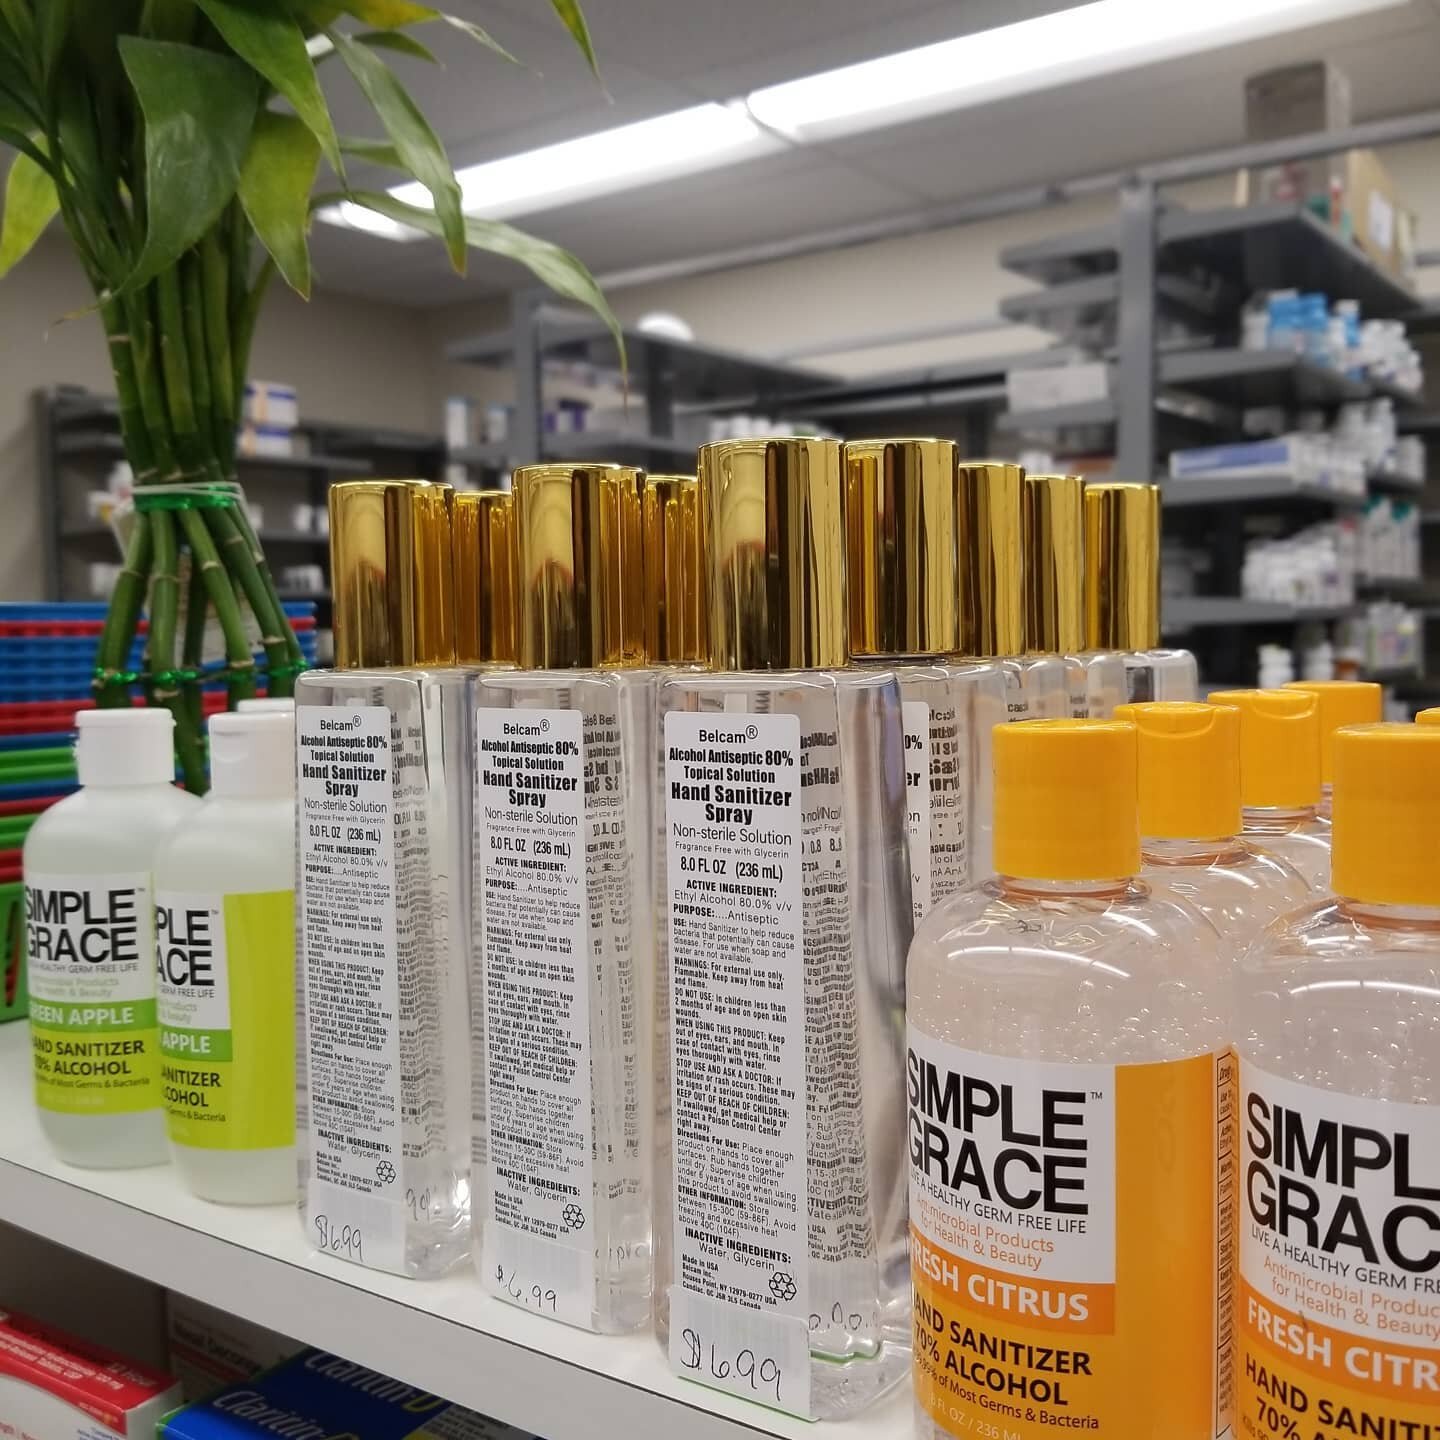 We are fully stocked as of 5/22/2020 with 8oz. bottles of hand sanitizer spray or gel available for $6.99 each.
#hopepharmacyrva #independentpharmacyowner #themarketat25th #helpingthecommunity